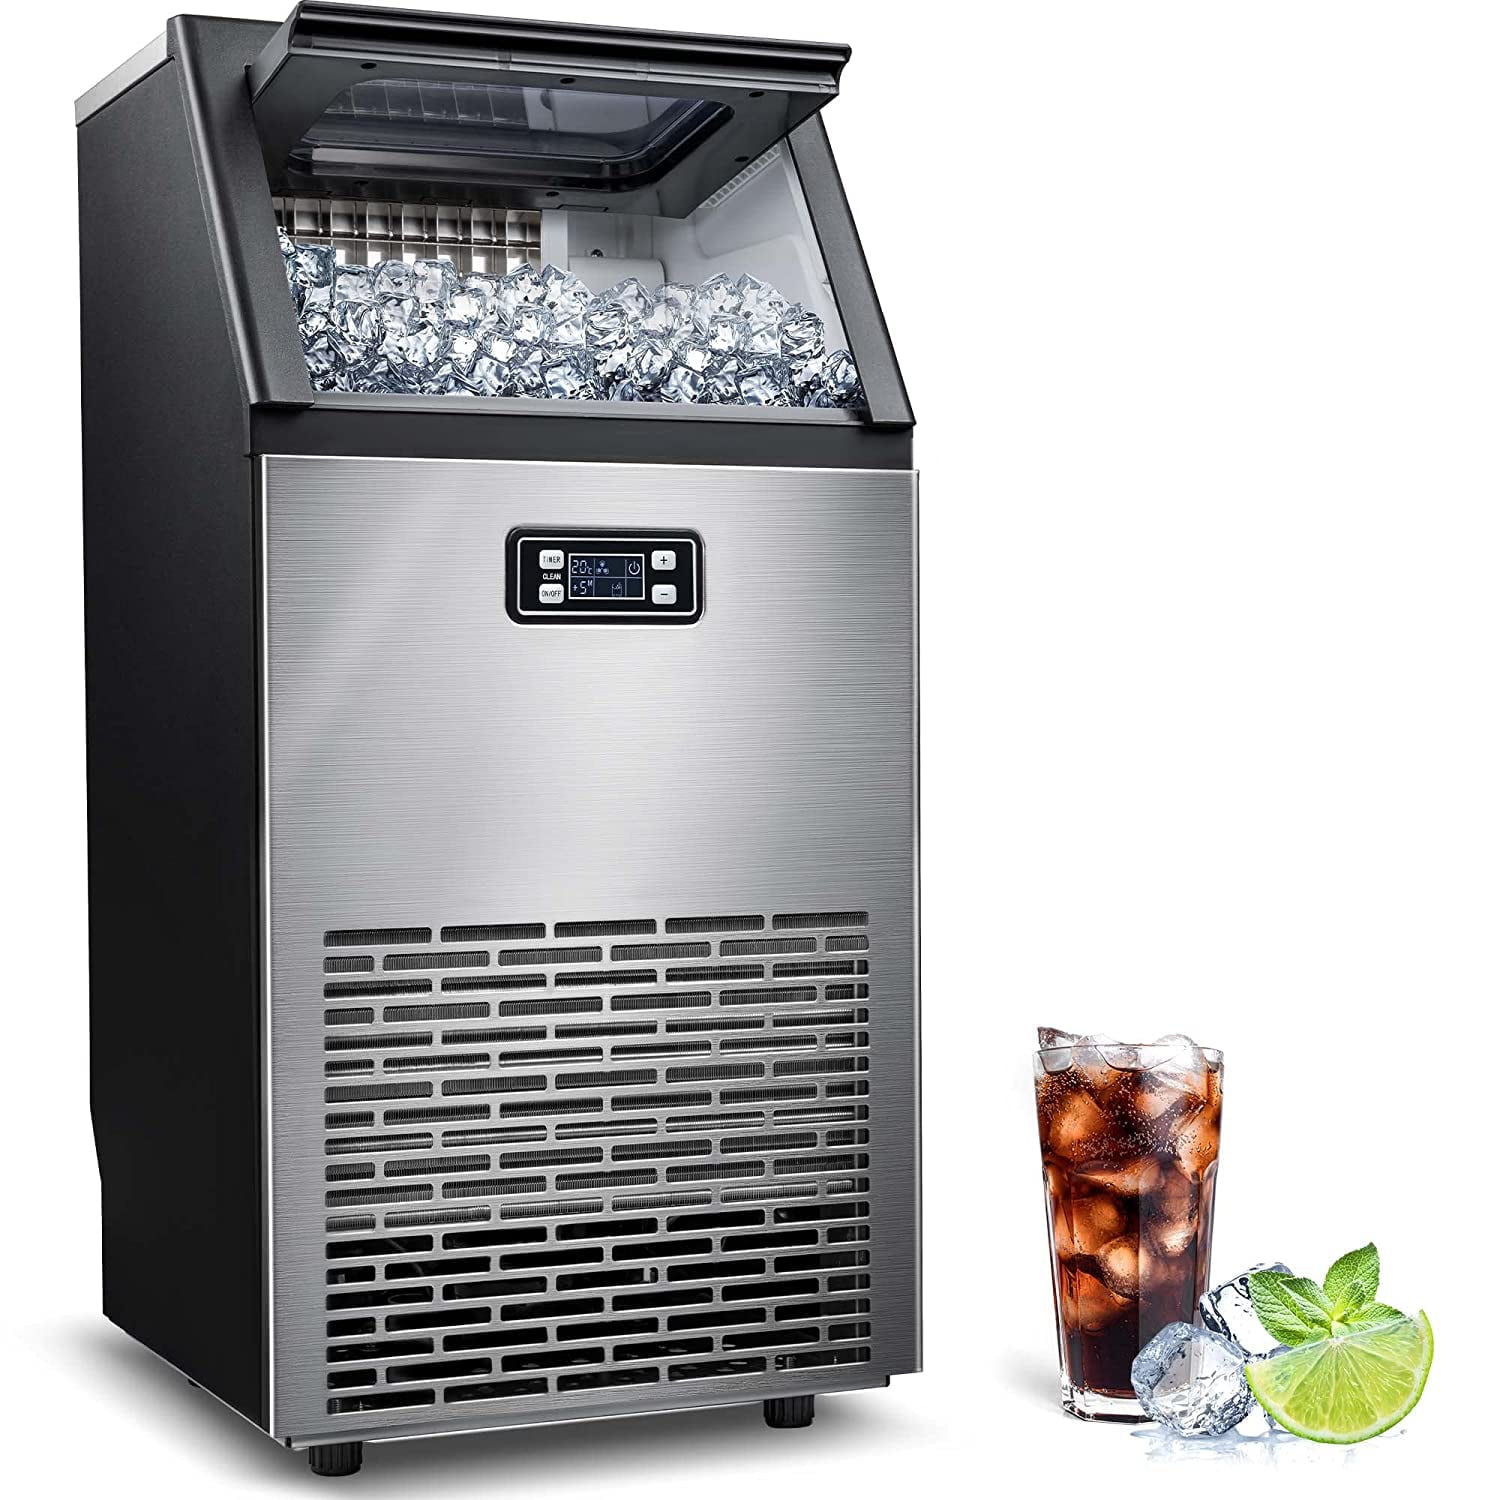 Mueller Countertop Nugget Ice Maker – Quiet, Heavy-Duty Ice Machine, 30 lbs  Daily, 3 QT Tank, Compact & Portable, Includes Basket - Self-Cleaning